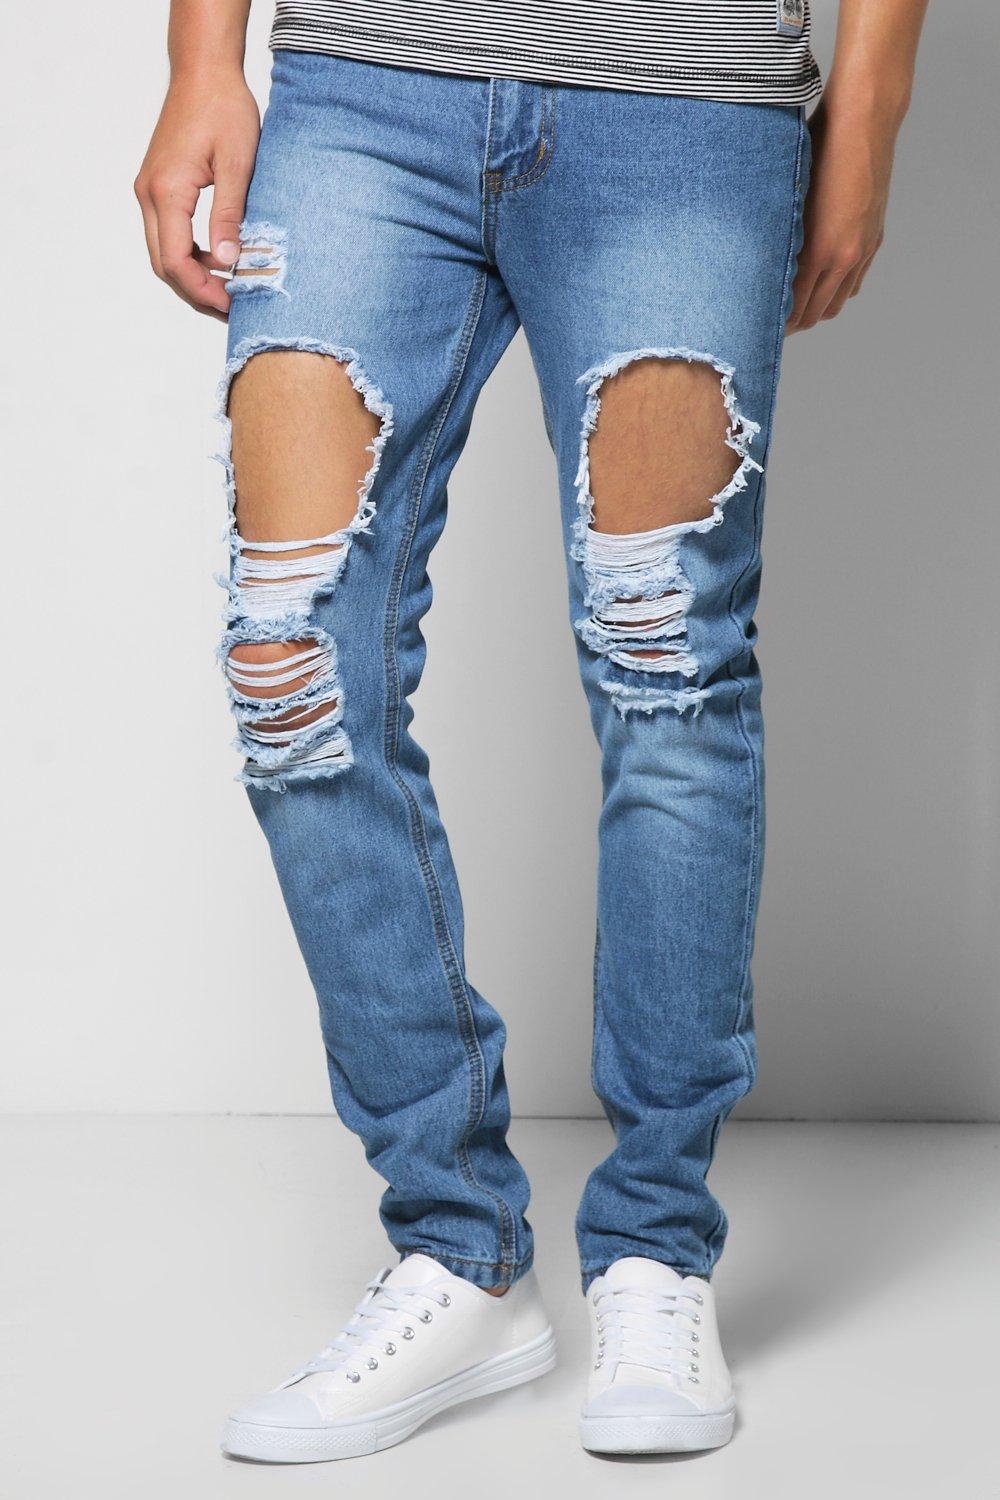 very ripped jeans mens